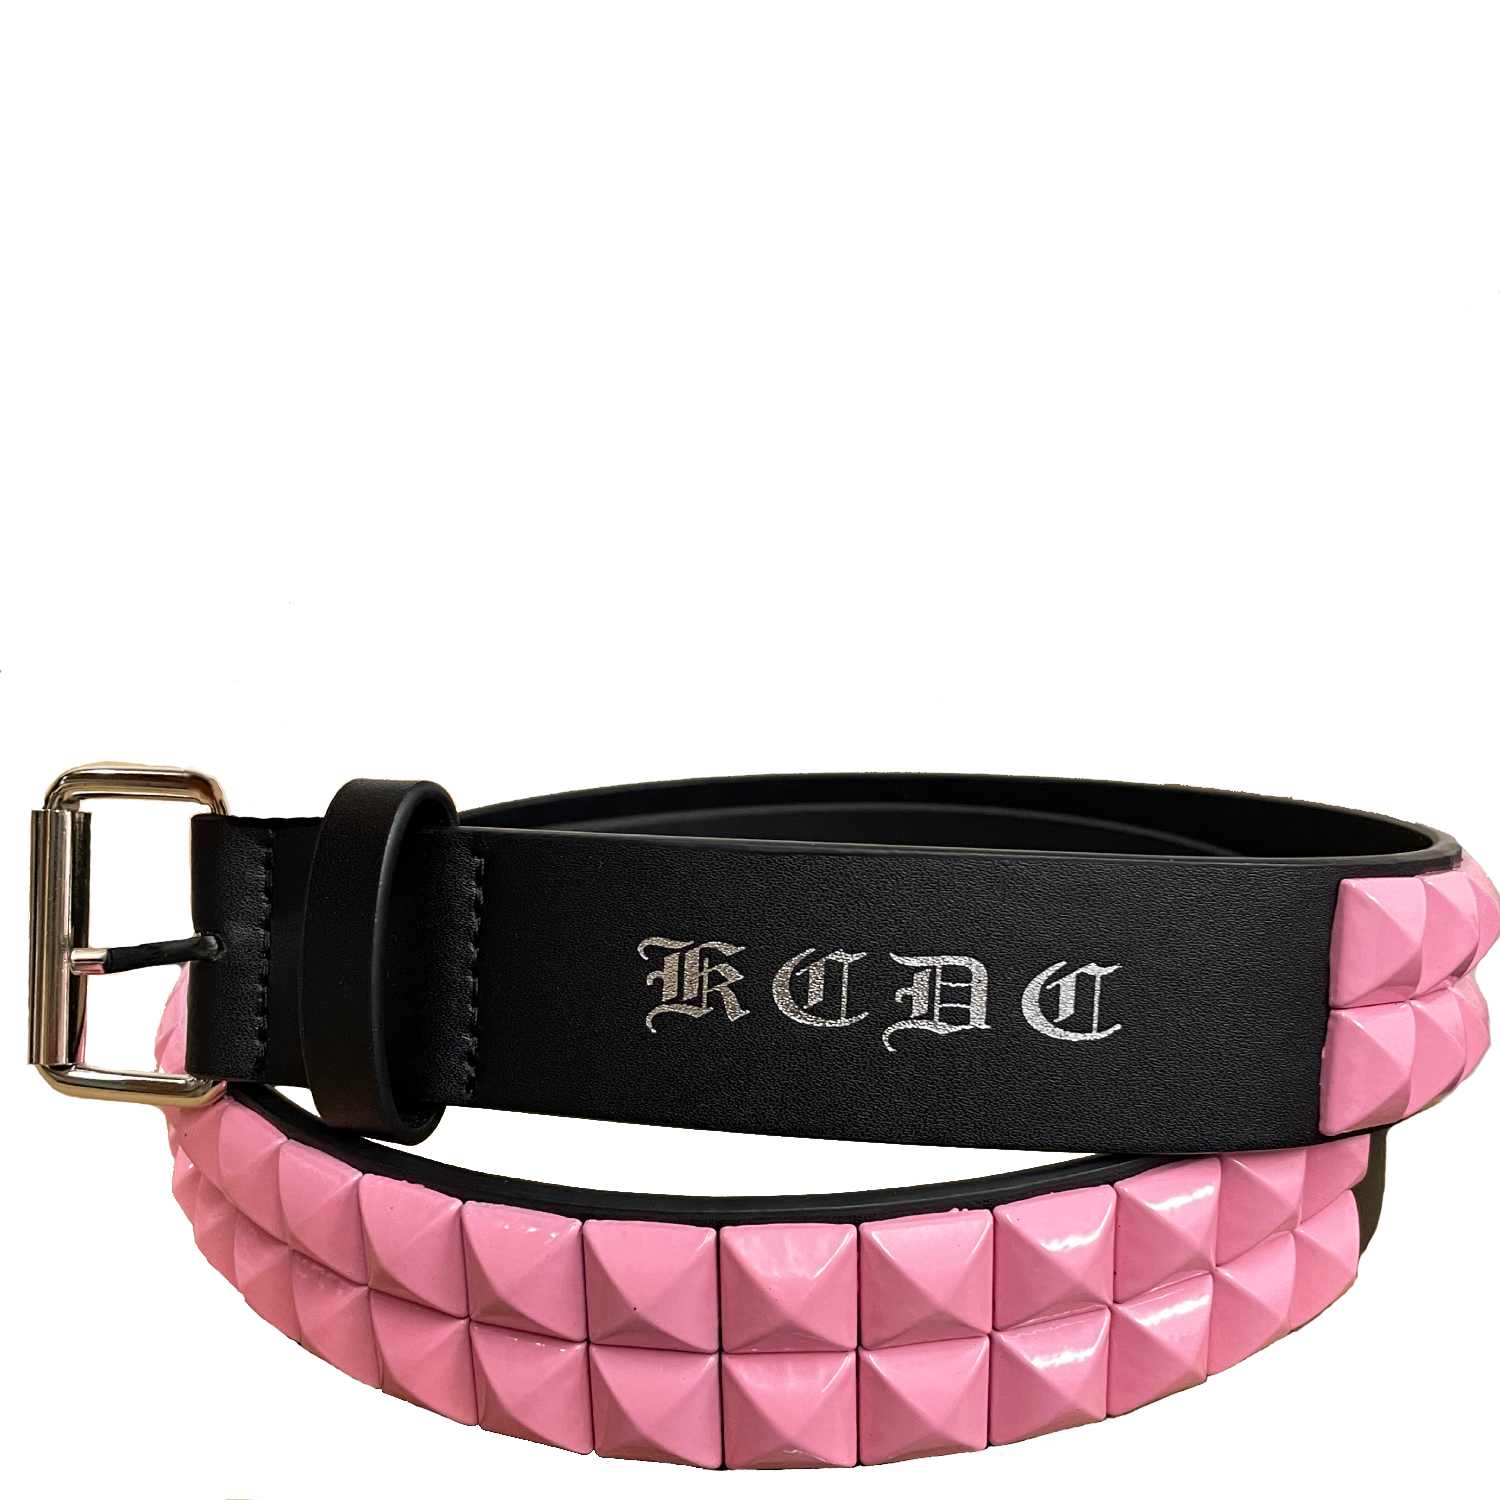 Loosey x KCDC Studded Belt - Black/Pink